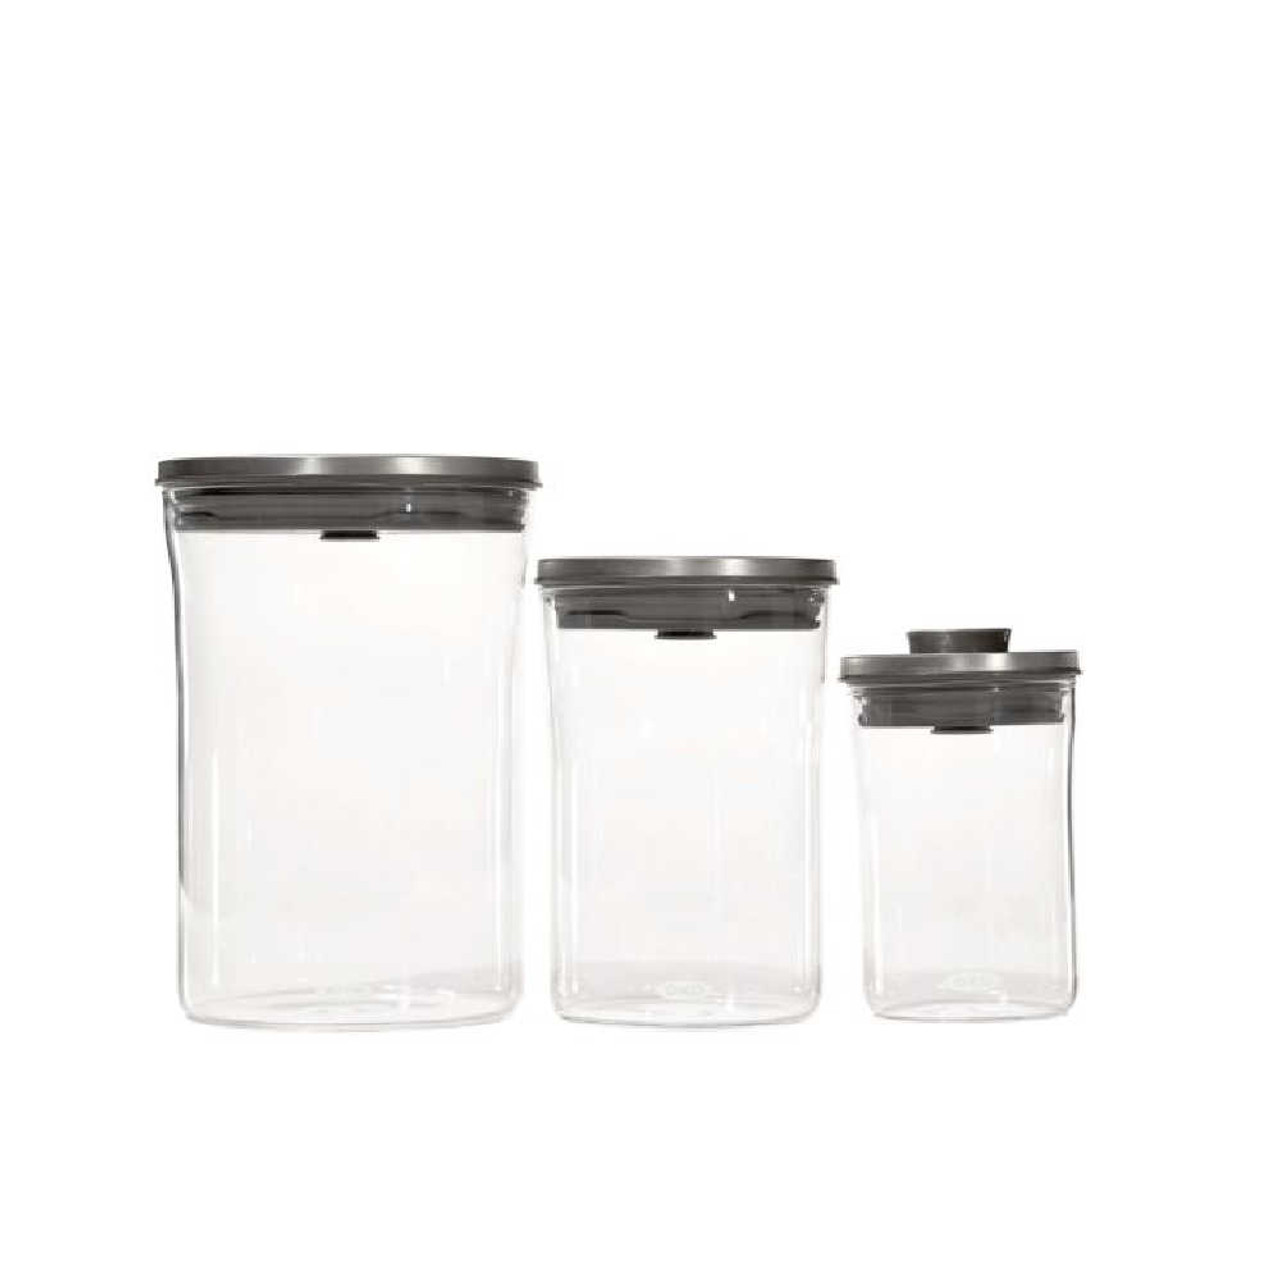 https://cdn11.bigcommerce.com/s-hccytny0od/images/stencil/1280x1280/products/4674/19069/OXO_Steel_3-Piece_Graduated_Container_Set__77764.1651616122.jpg?c=2?imbypass=on